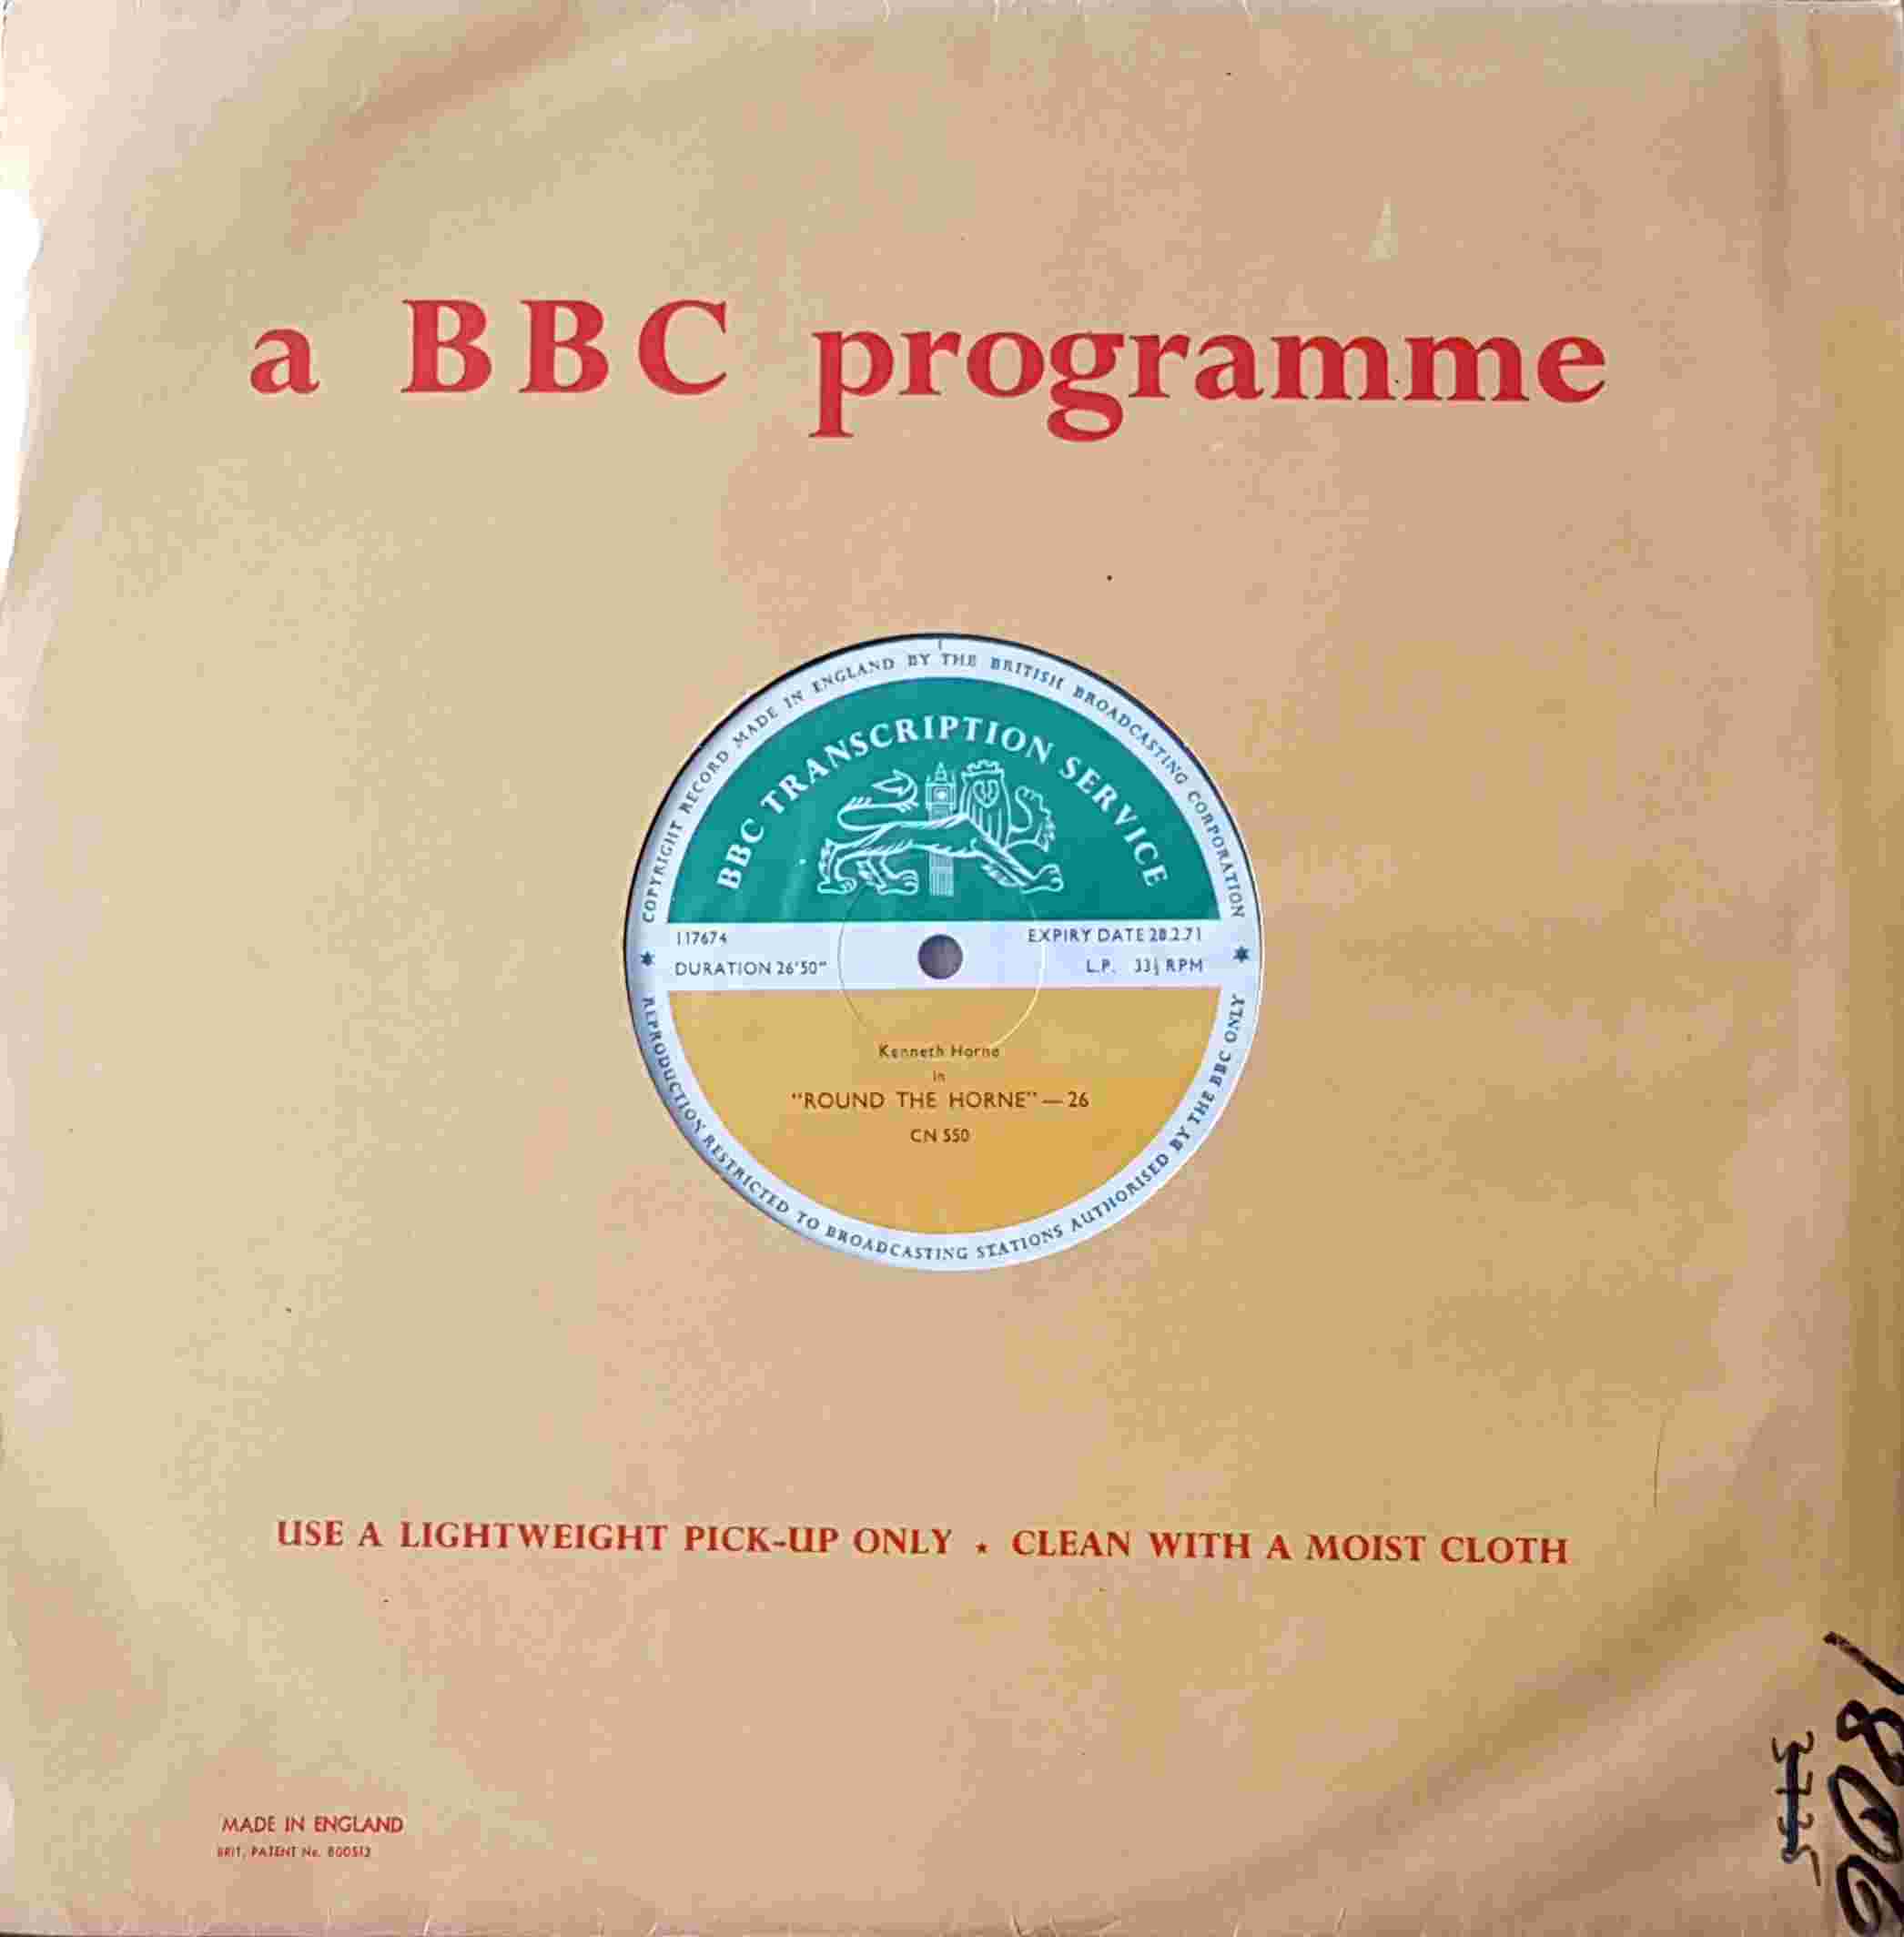 Picture of CN 550 14 Round the Horne - 26 by artist Kenneth Horne from the BBC records and Tapes library